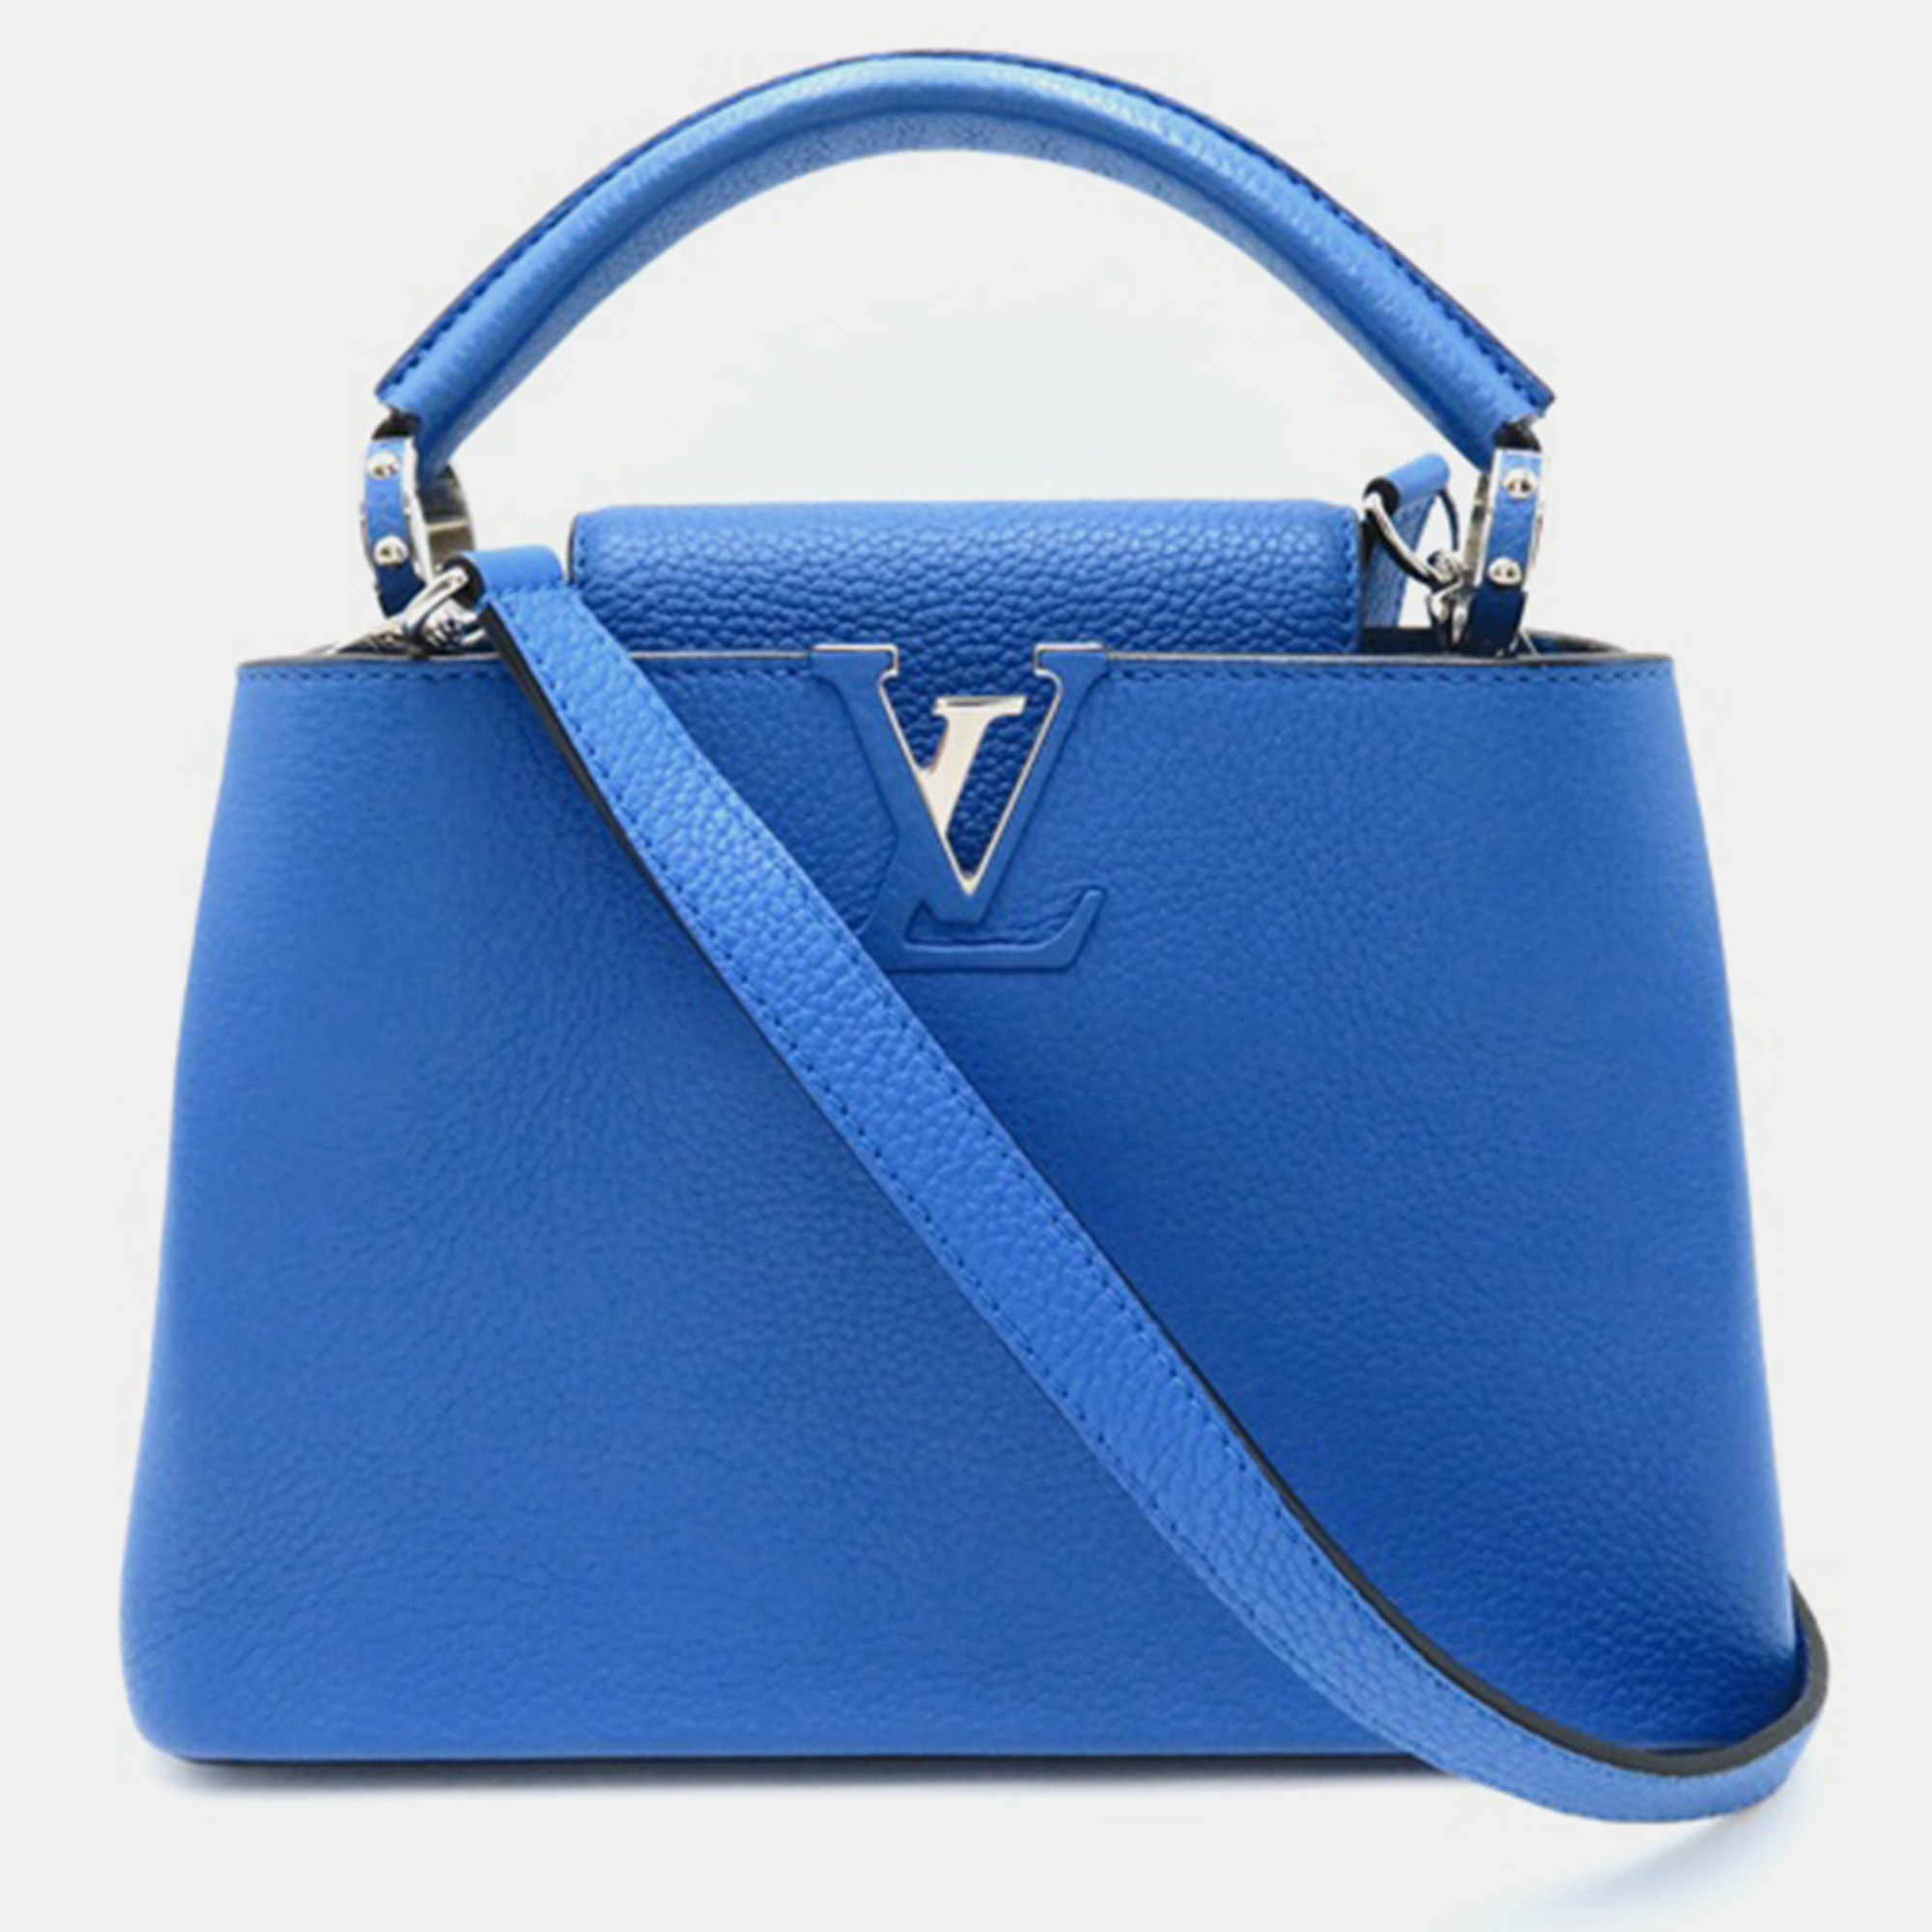 Pre-owned Louis Vuitton Blue Leather Taurillon Capucines Bb Top Handle Bags